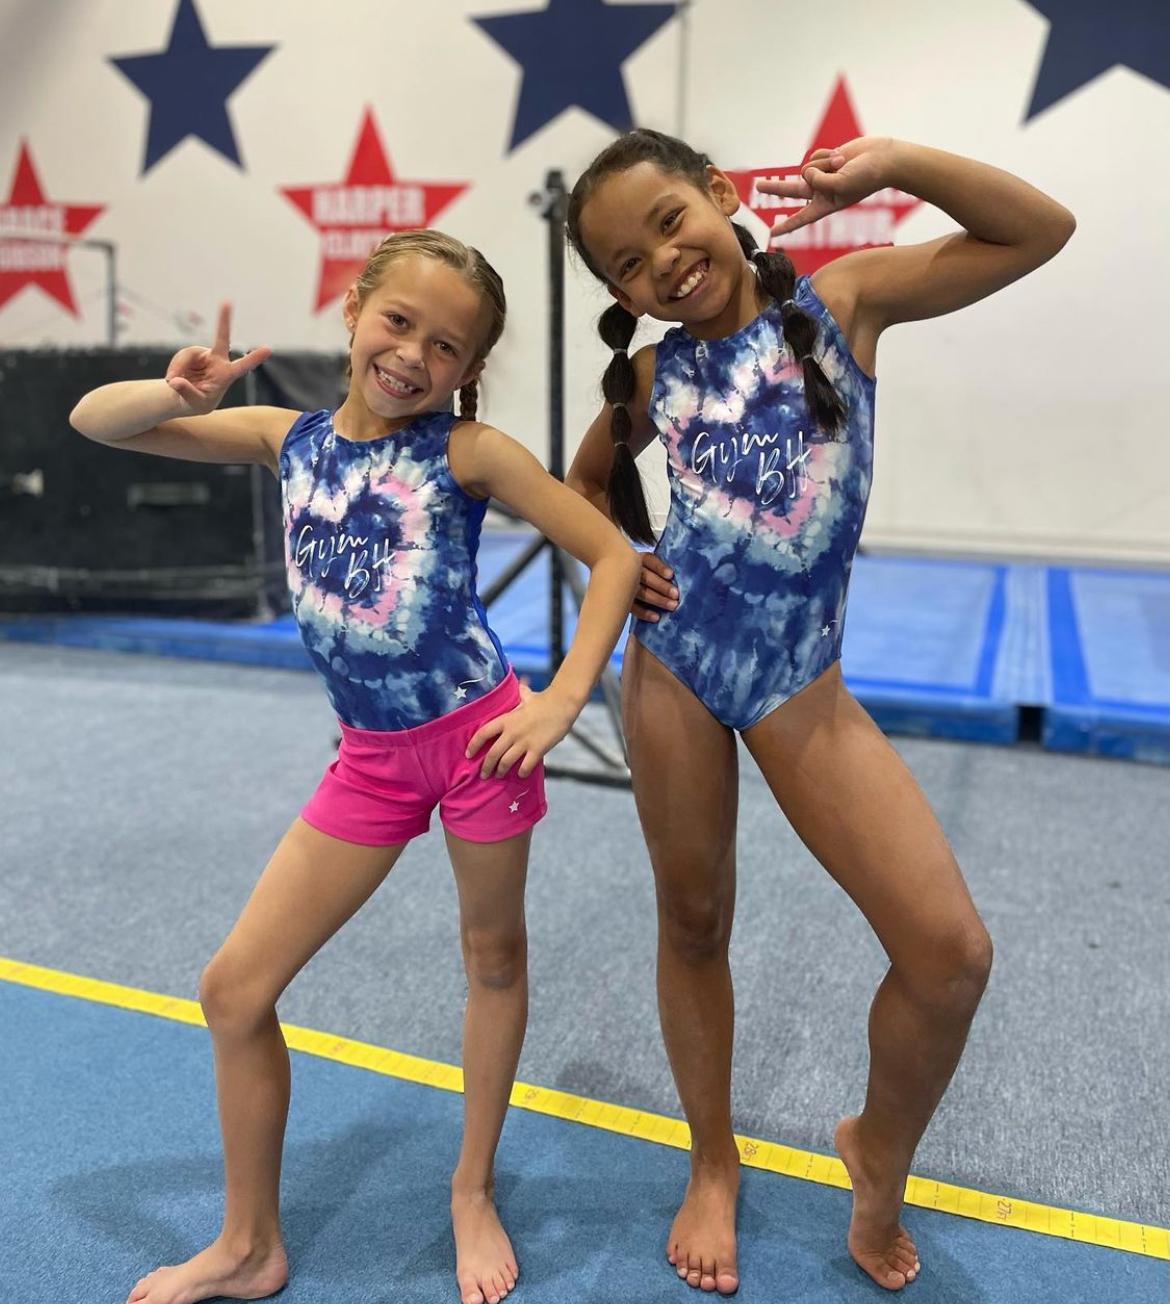 Top 5 Gymnastics Gifts for 8 Year Old Girls 